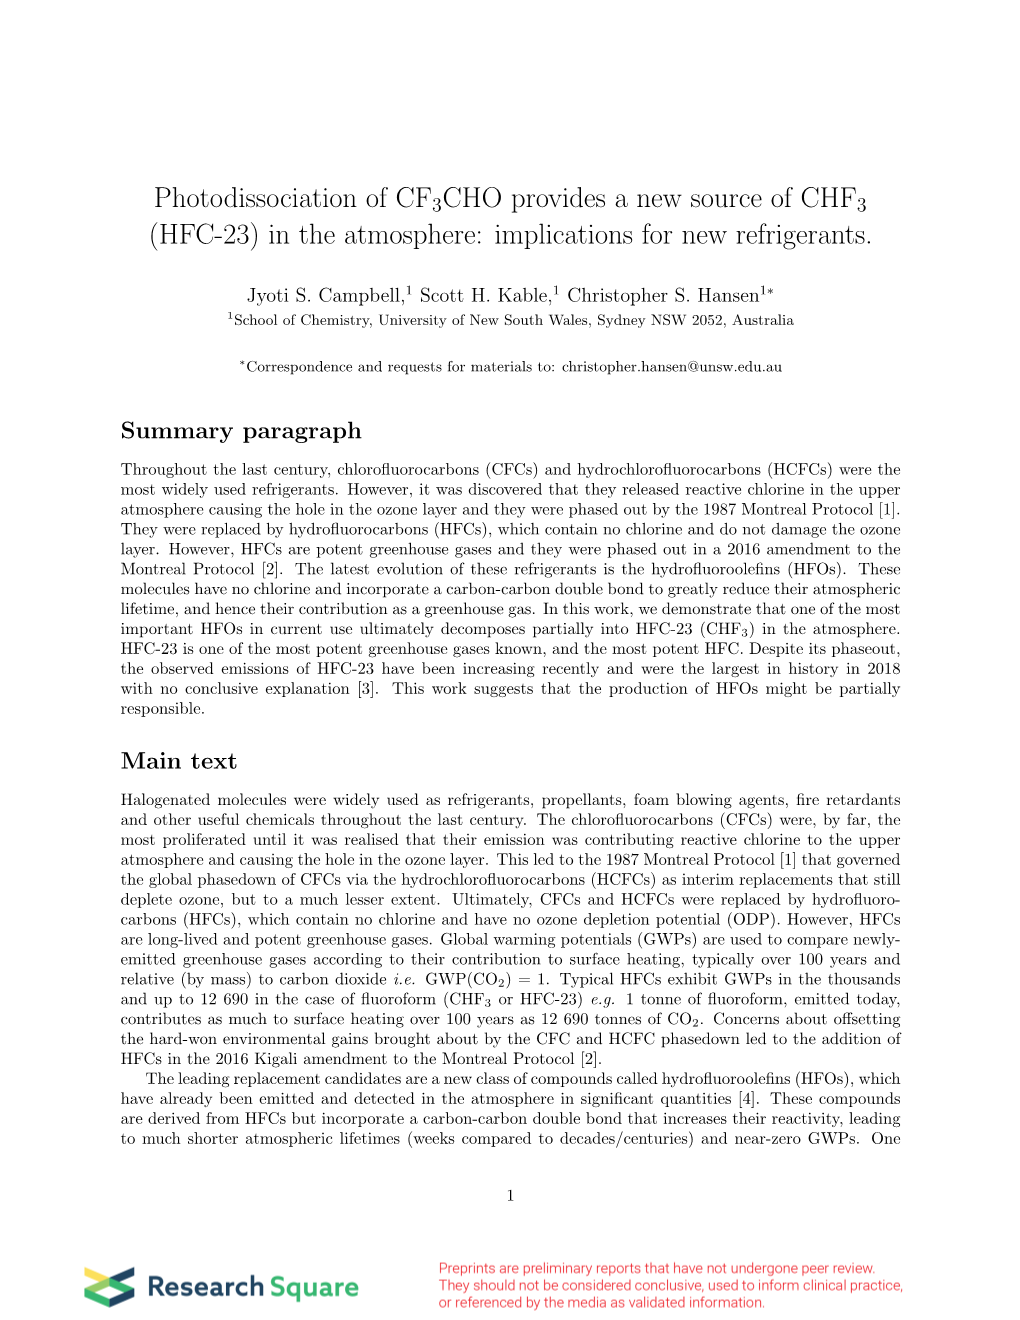 Photodissociation of CF3CHO Provides a New Source of CHF3 (HFC-23) in the Atmosphere: Implications for New Refrigerants